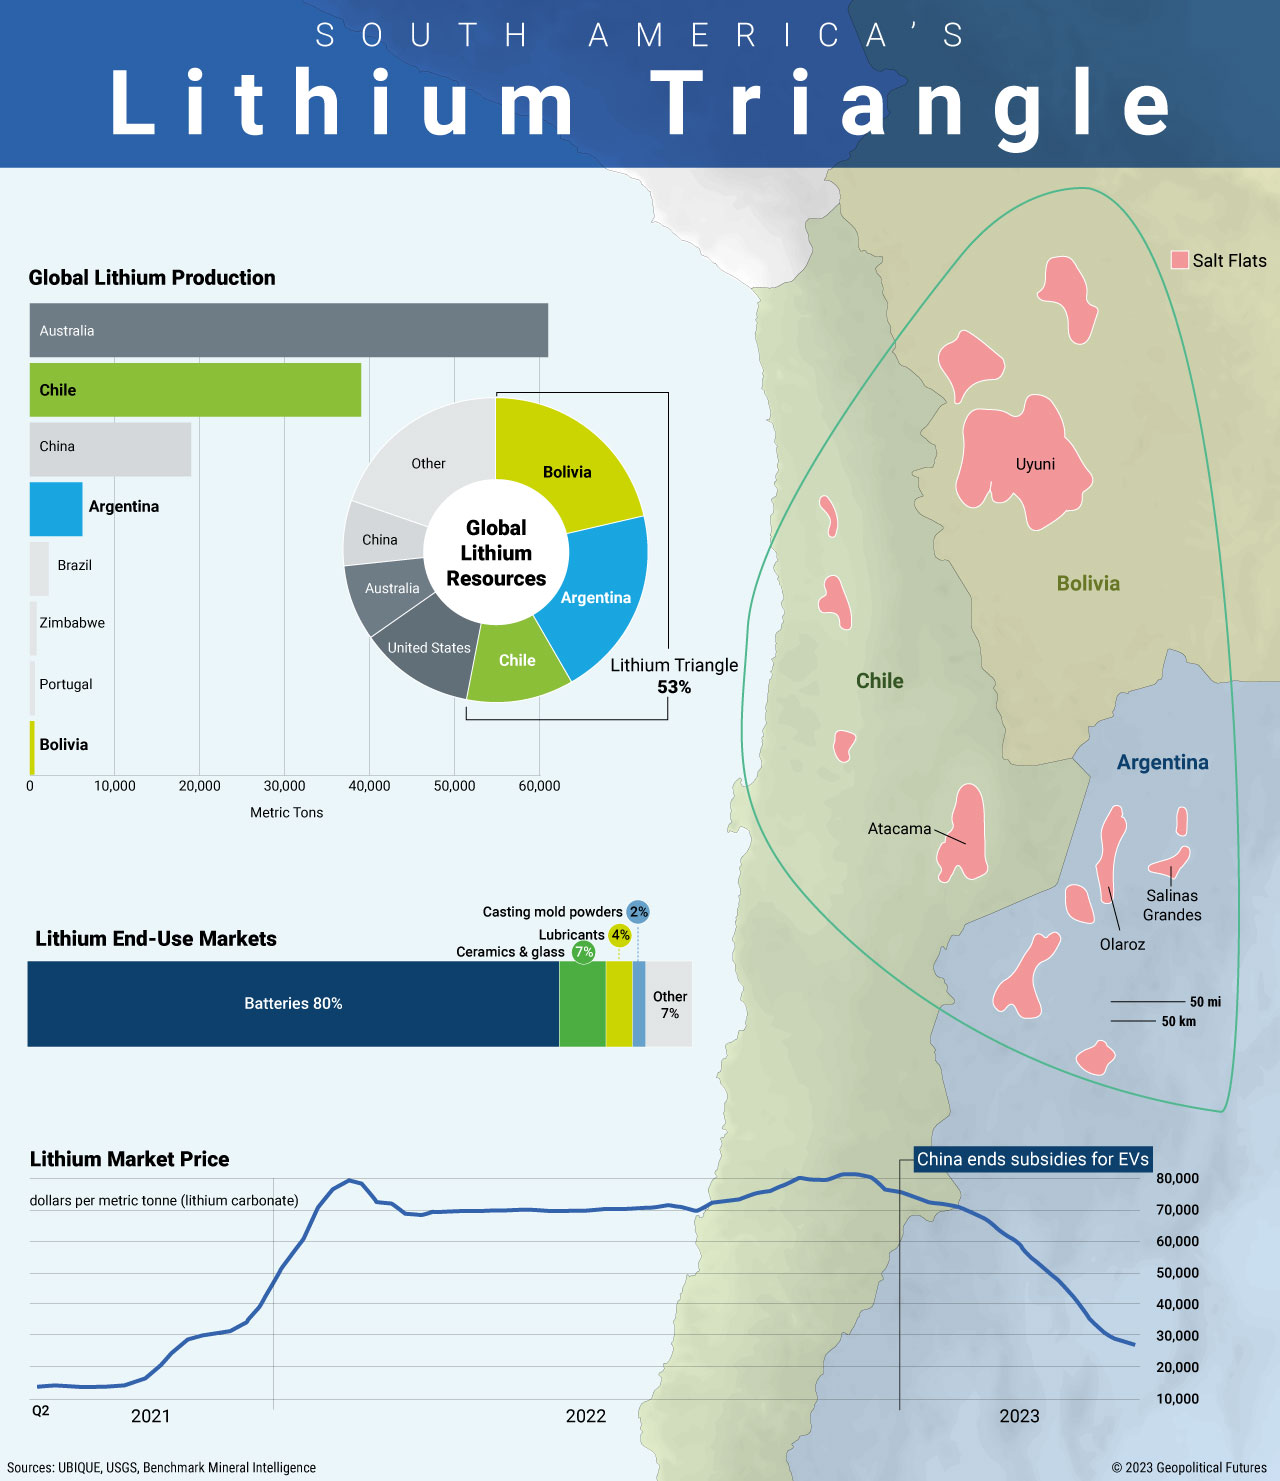 South America's Lithium Triangle